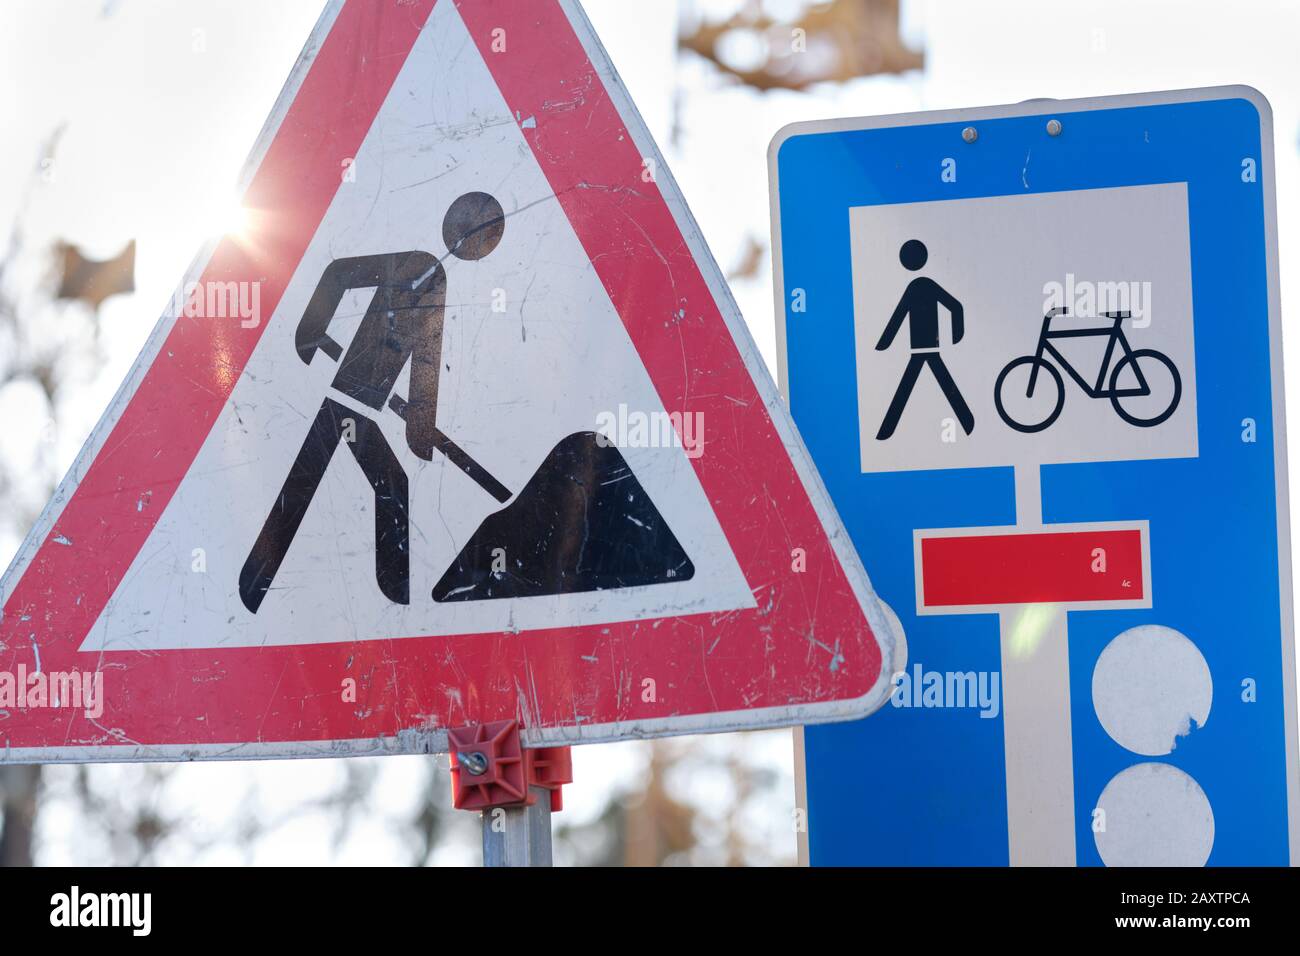 Traffic Signs For Attention Construction Site And For Dead End Street With Footpath And Cycle Path Against The Bright White Sky Seen In Germany In Fe Stock Photo Alamy